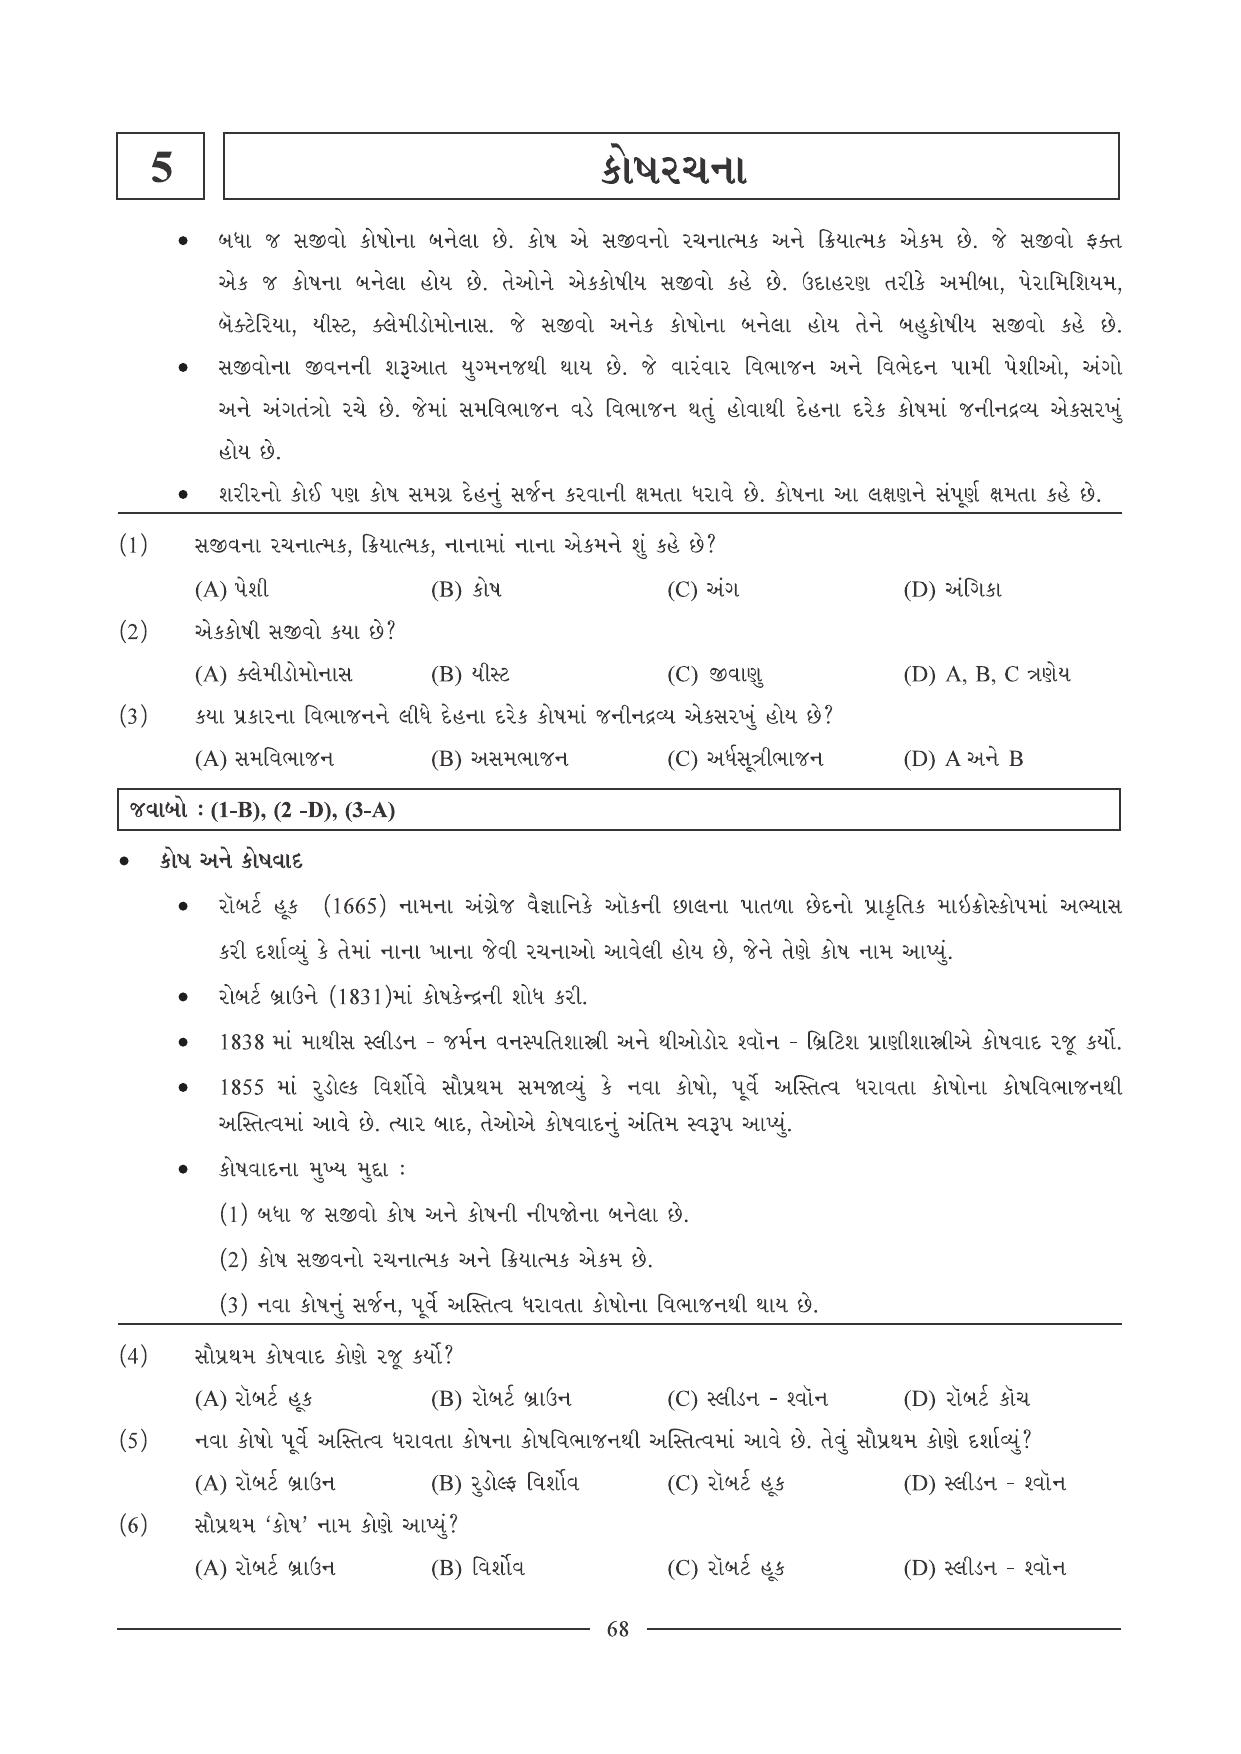 GSEB HSC Biology Question Paper (Gujarati Medium)- Chapter 5 - Page 1